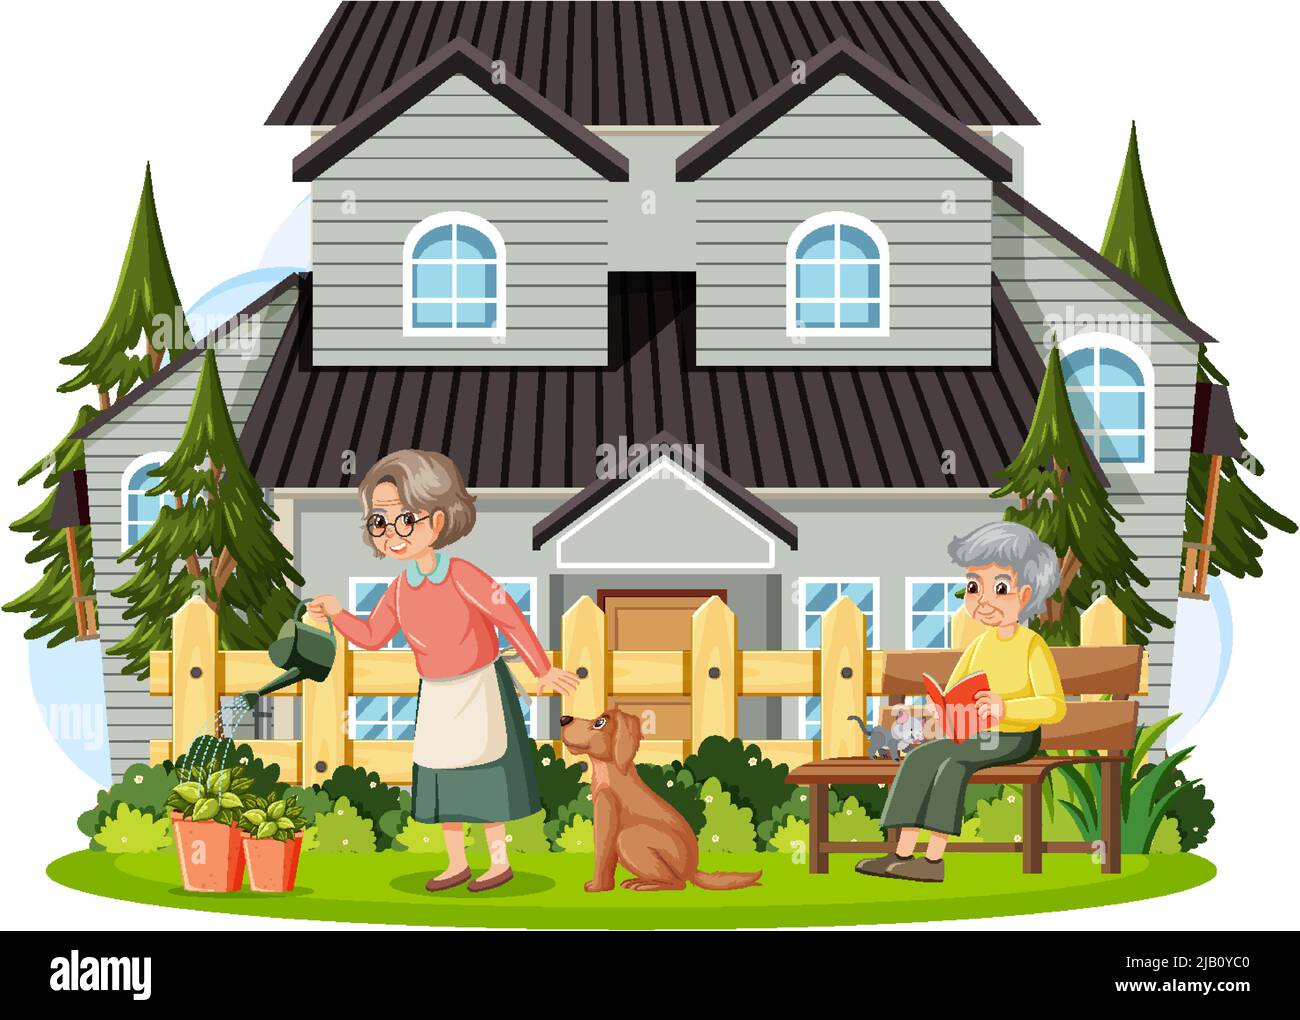 Elderly people in front of house illustration Stock Vector